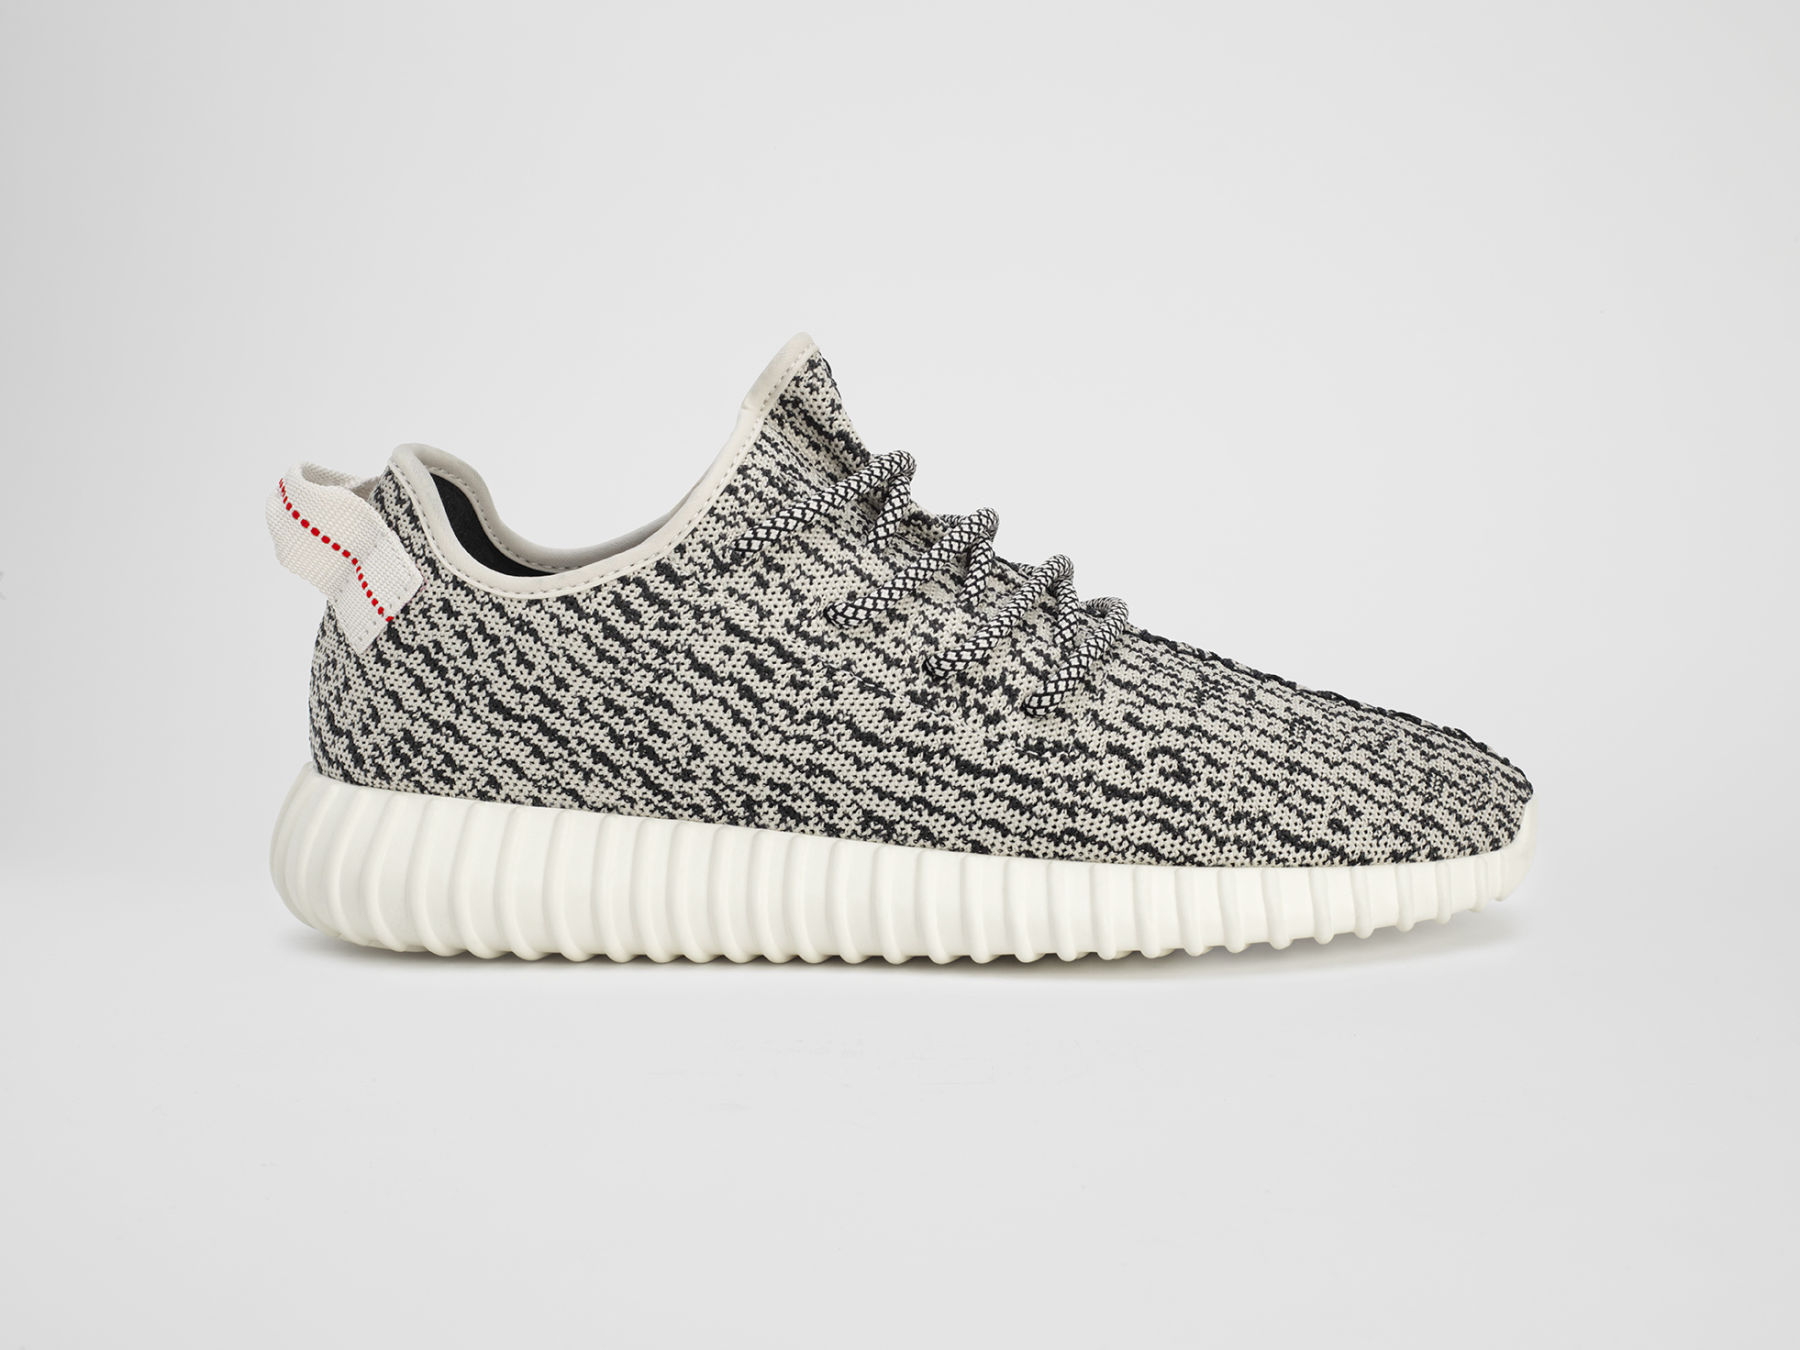 Kanye Wests sold out Yeezy Boost 350 sneakers on eBay at